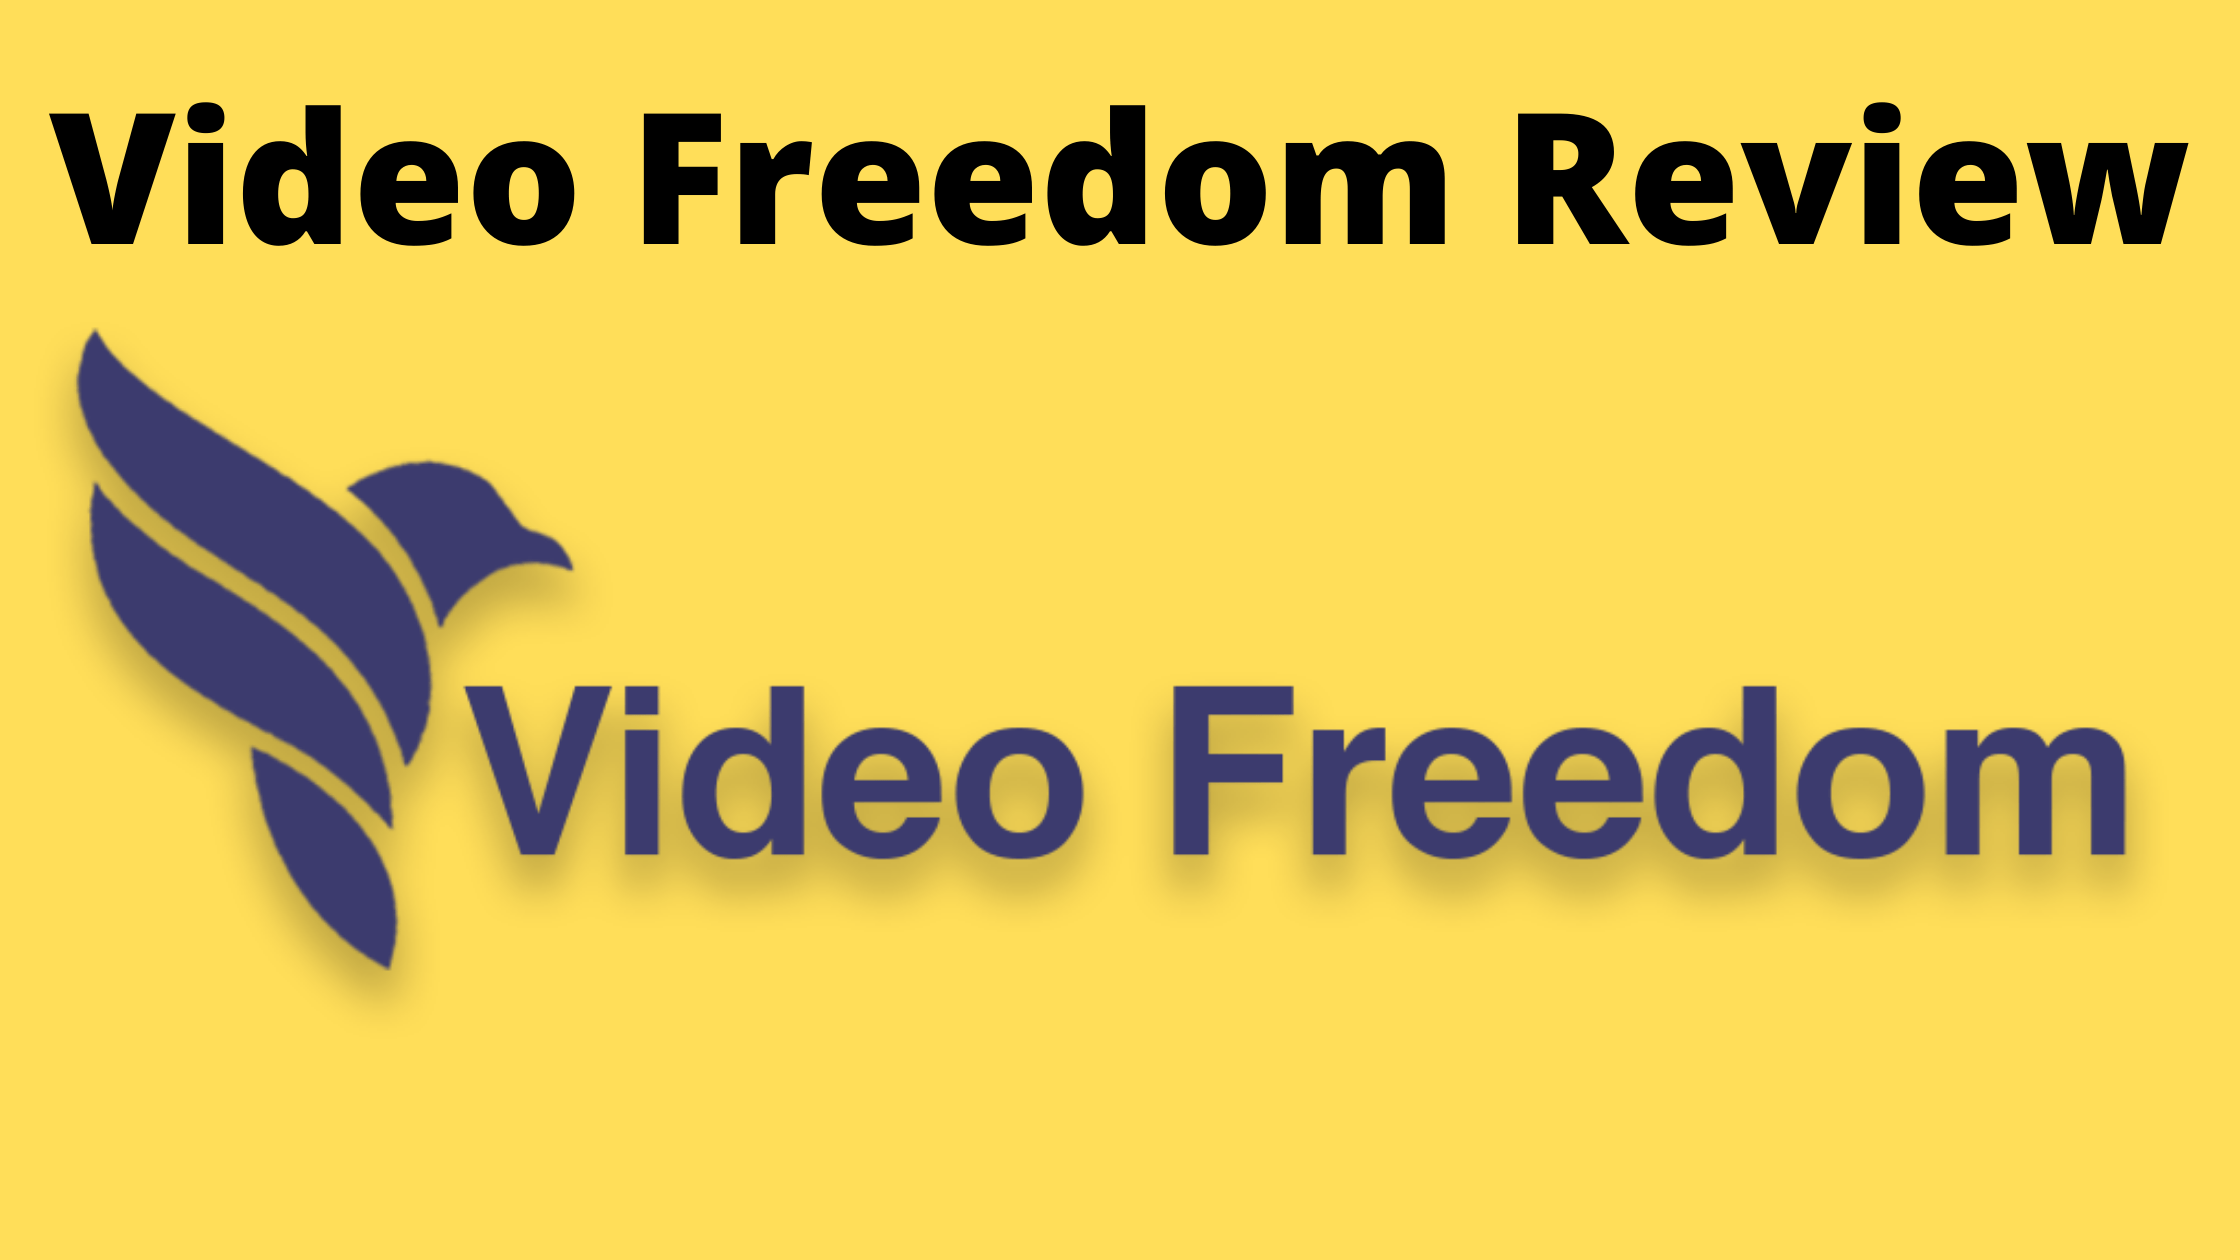 Video Freedom Review